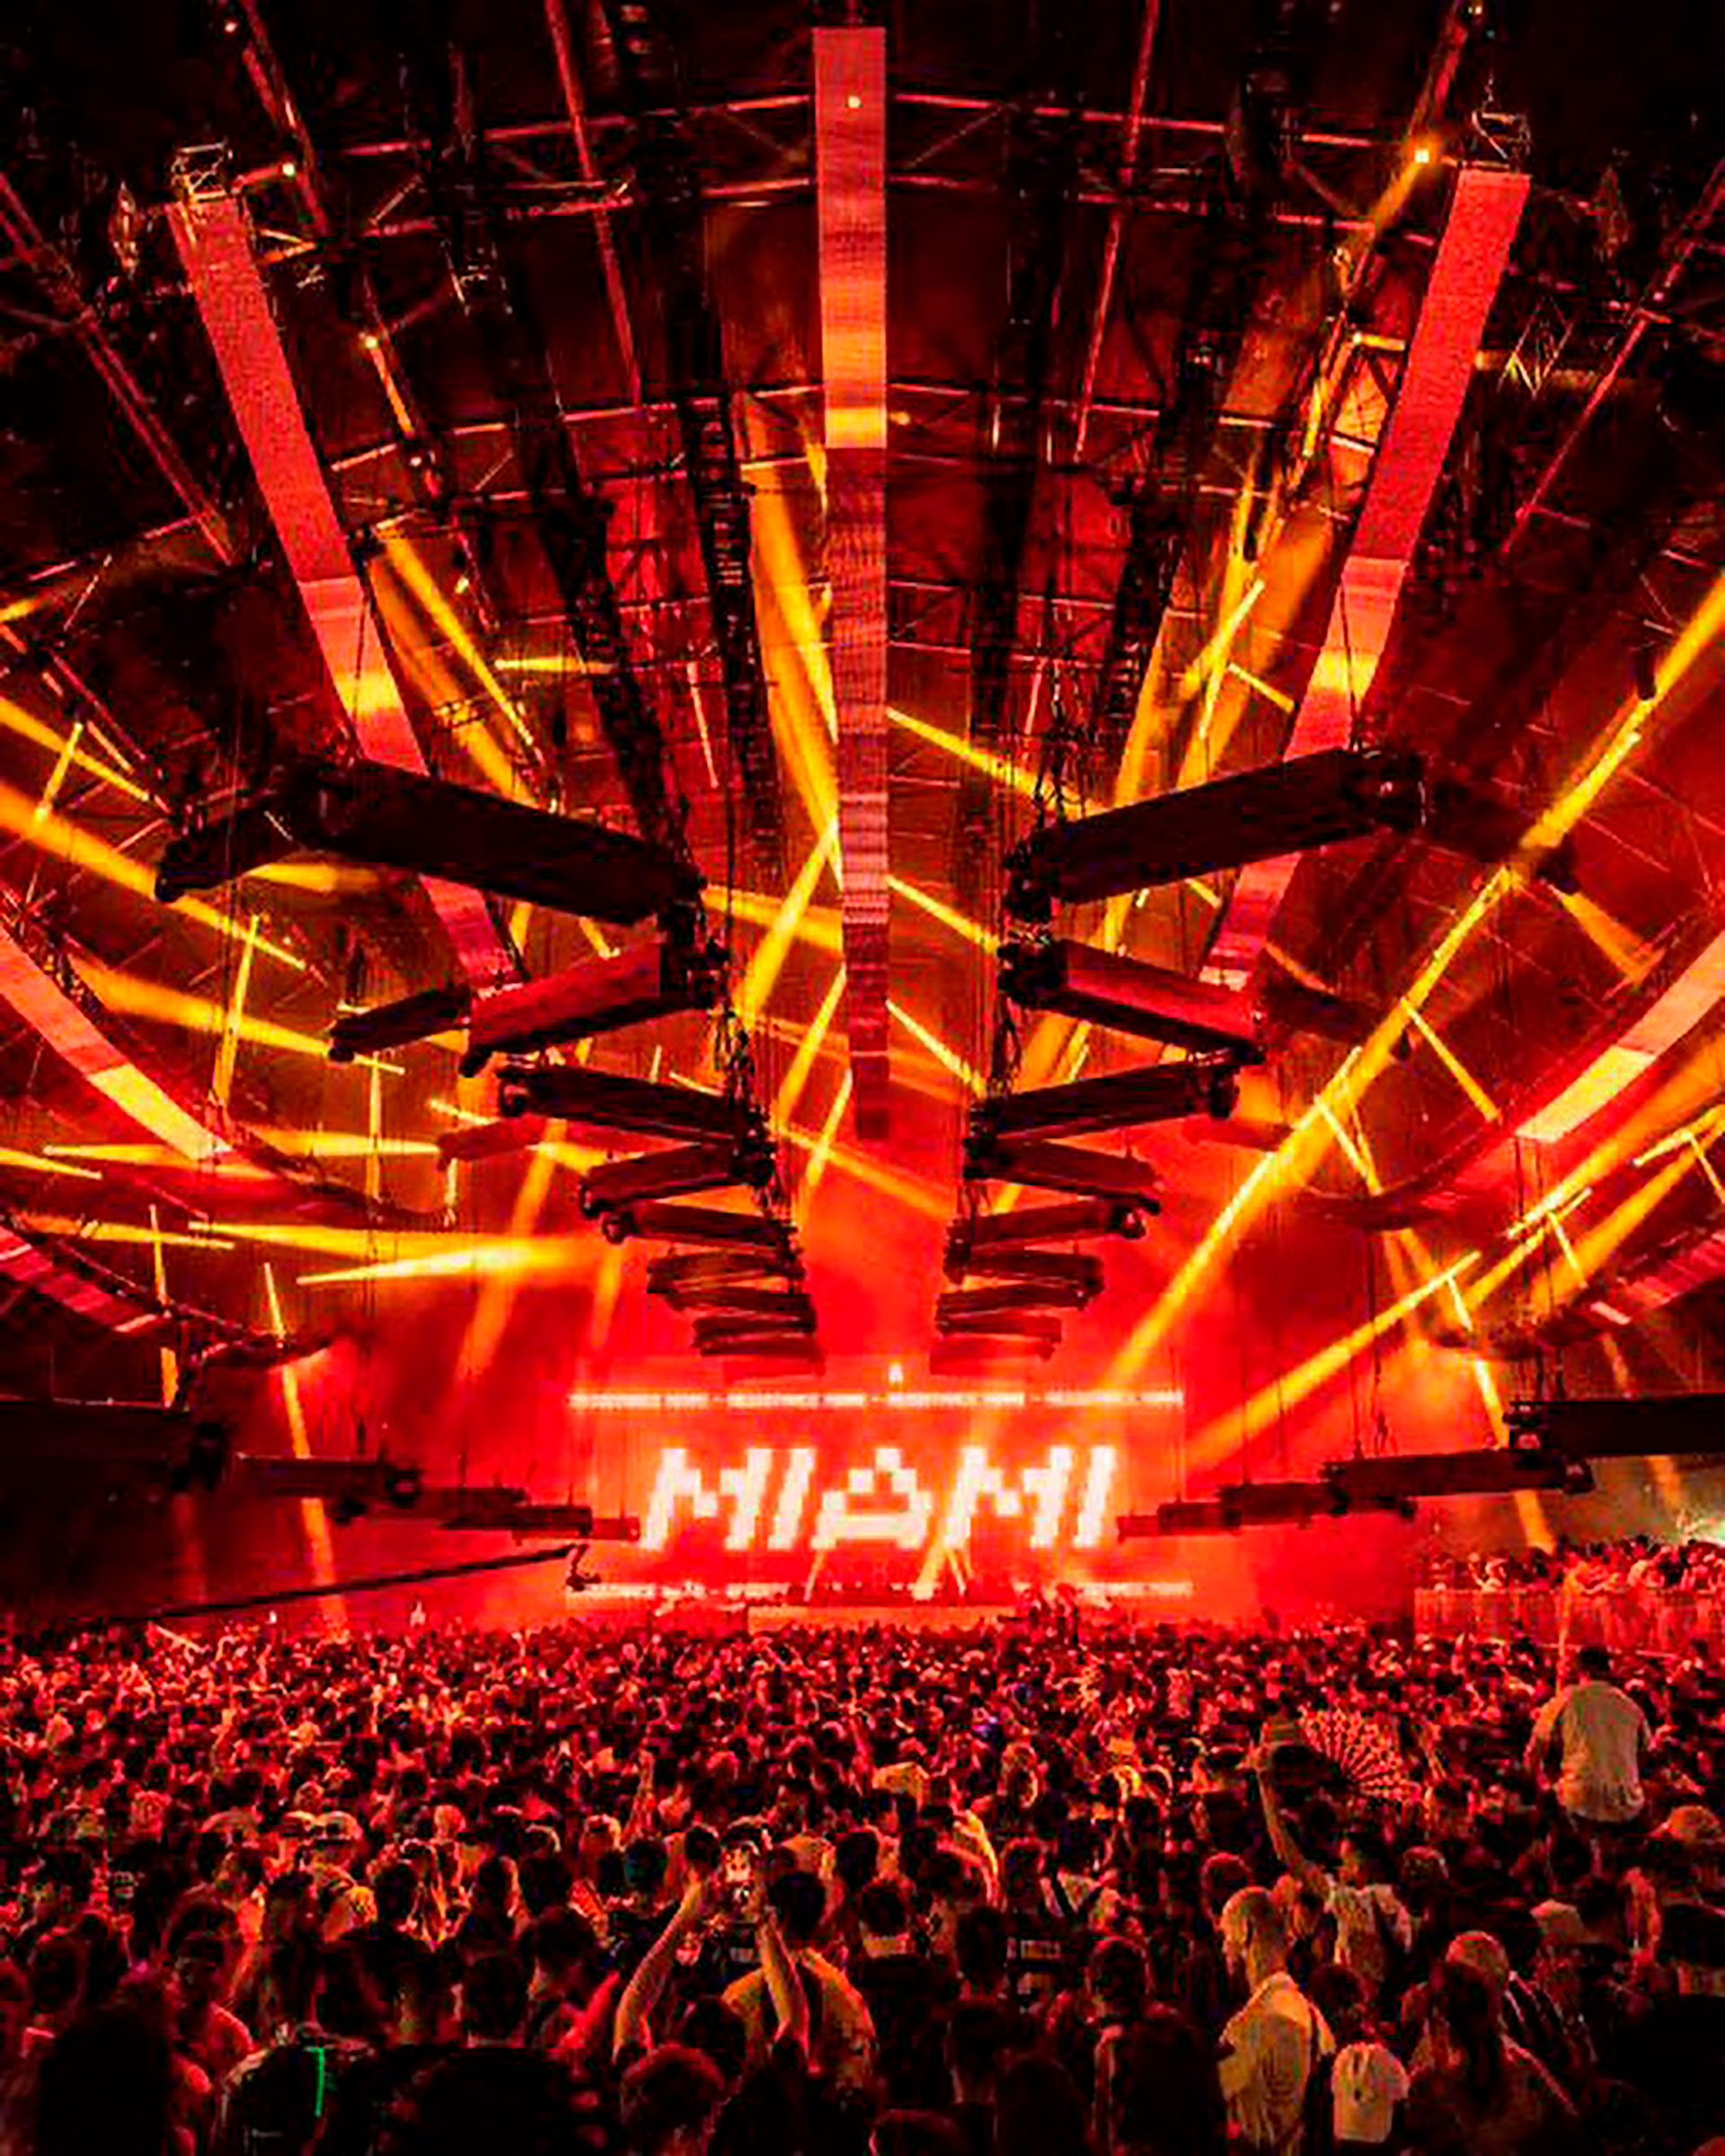 Electronic music and crowd energy merge for one unforgettable night at Miami's Ultra Music Festival (Ultra)